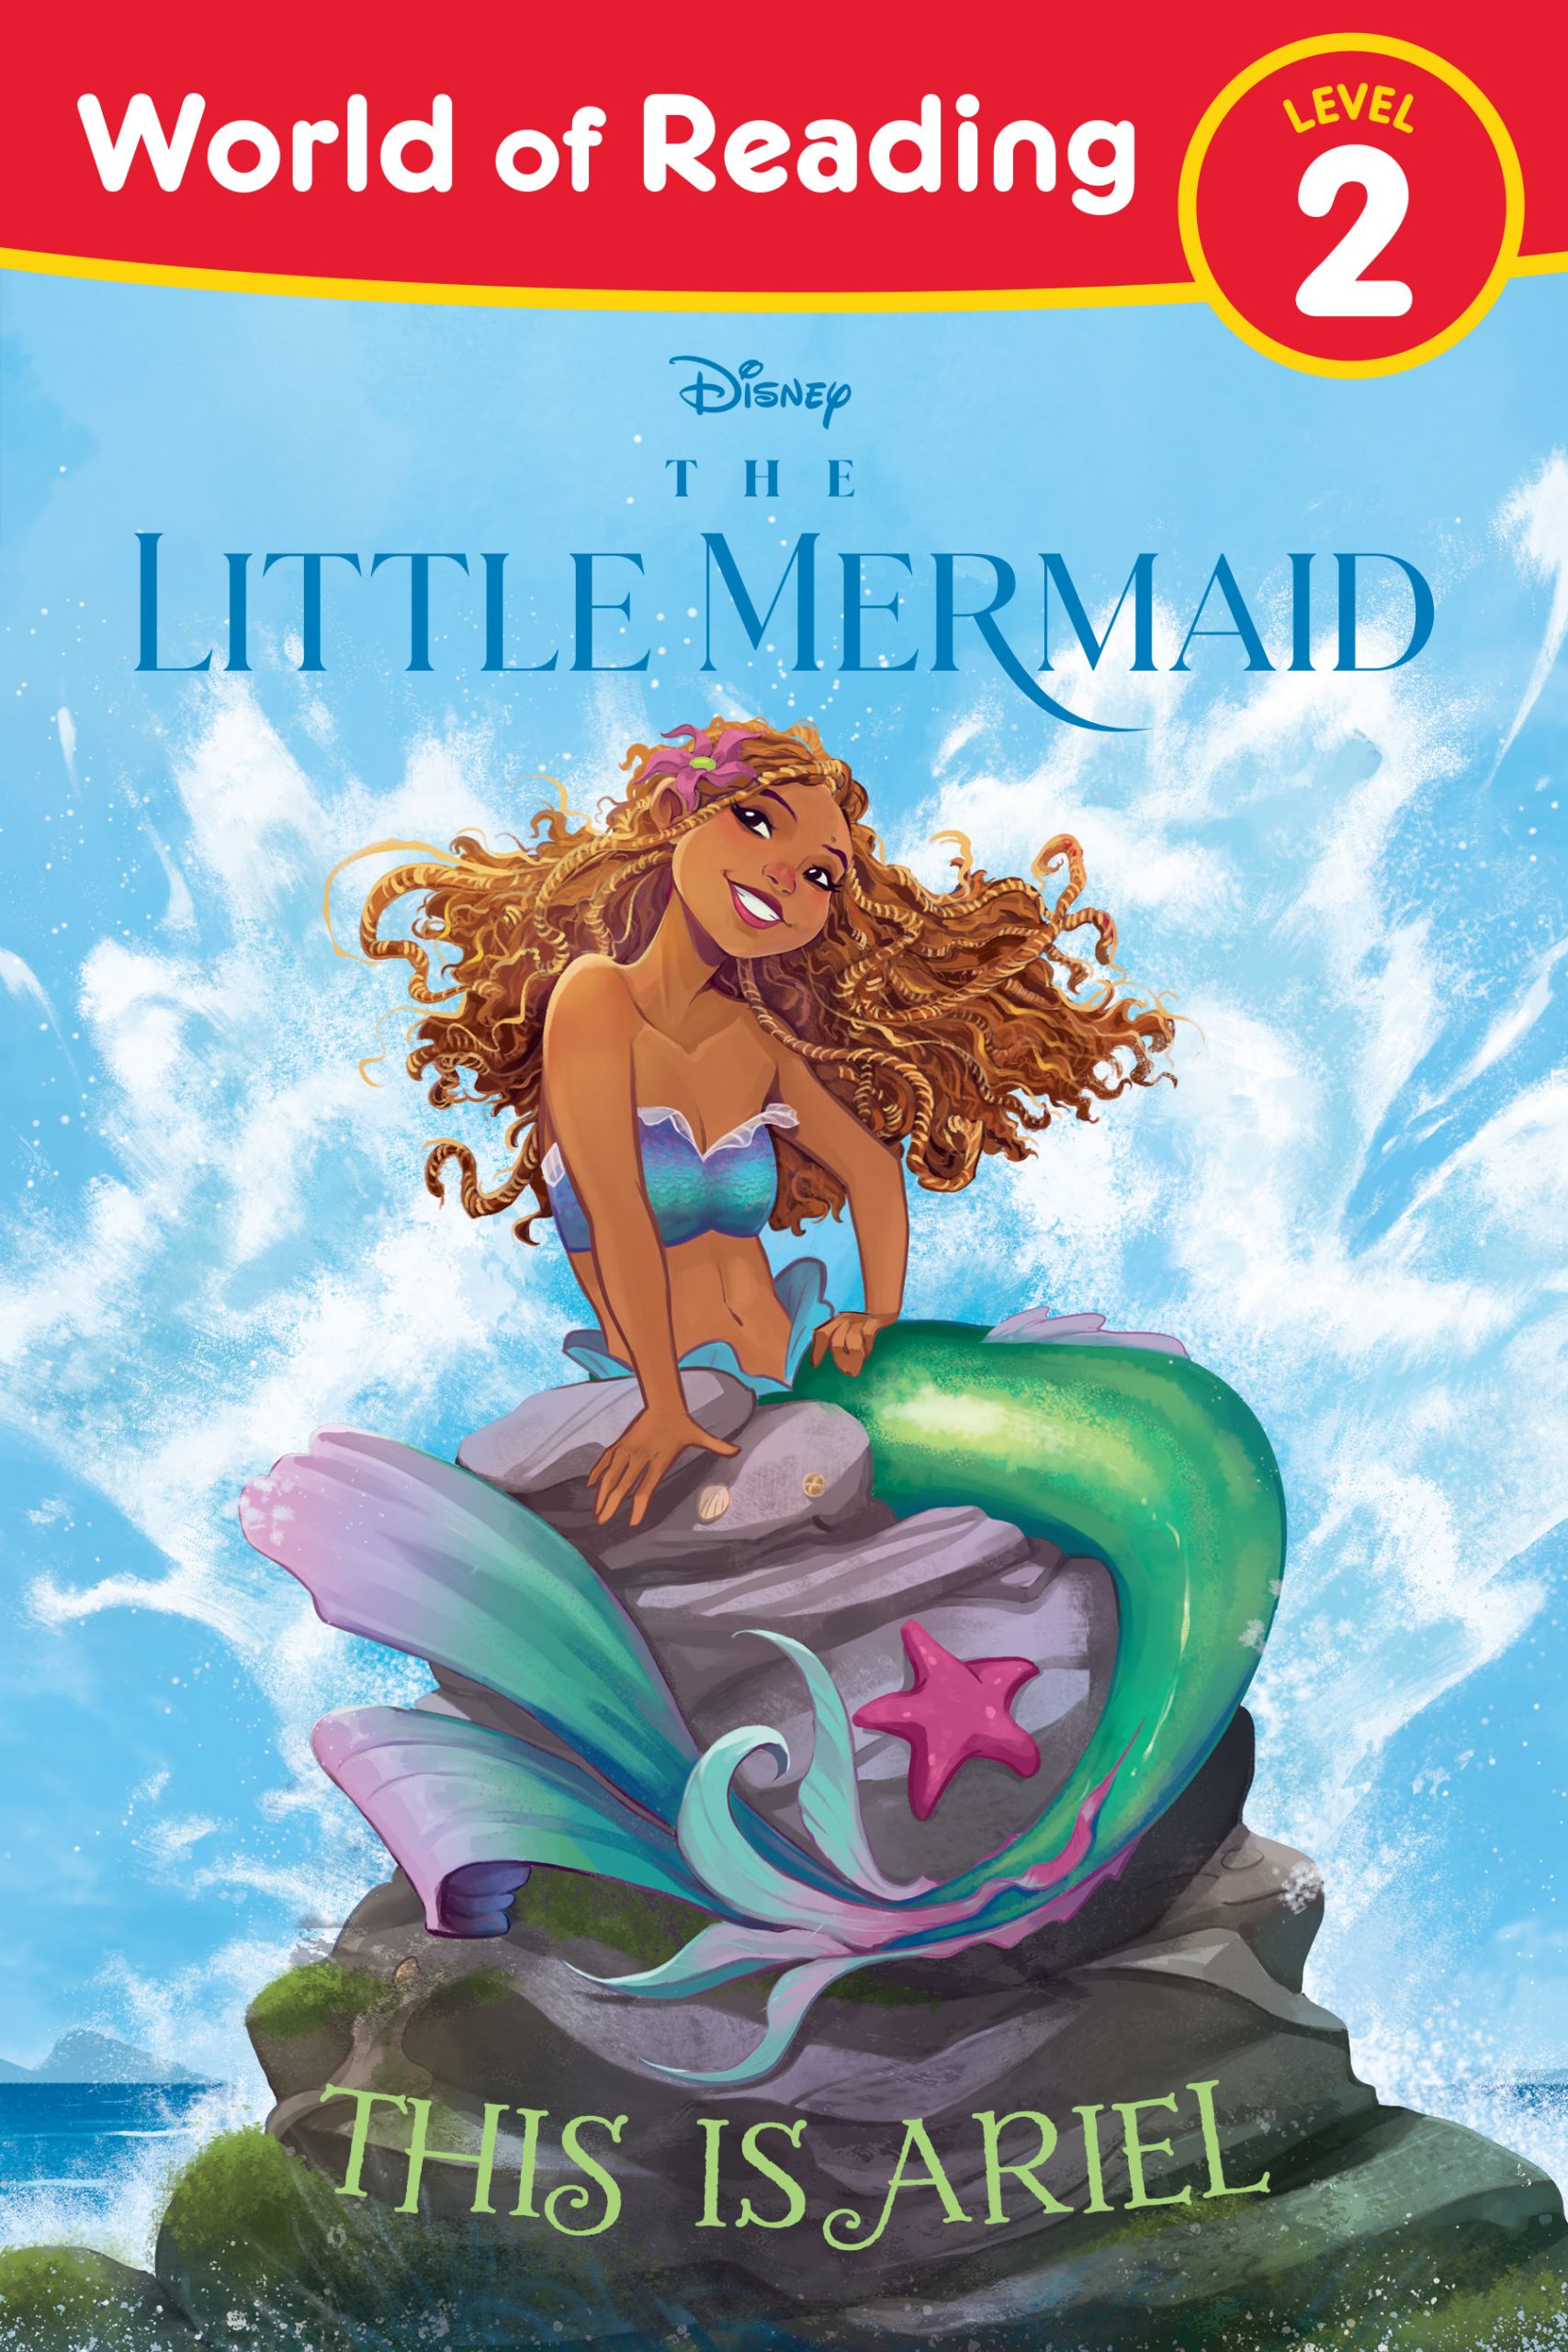 The Little Mermaid: This is Ariel by Colin Hosten - The Little